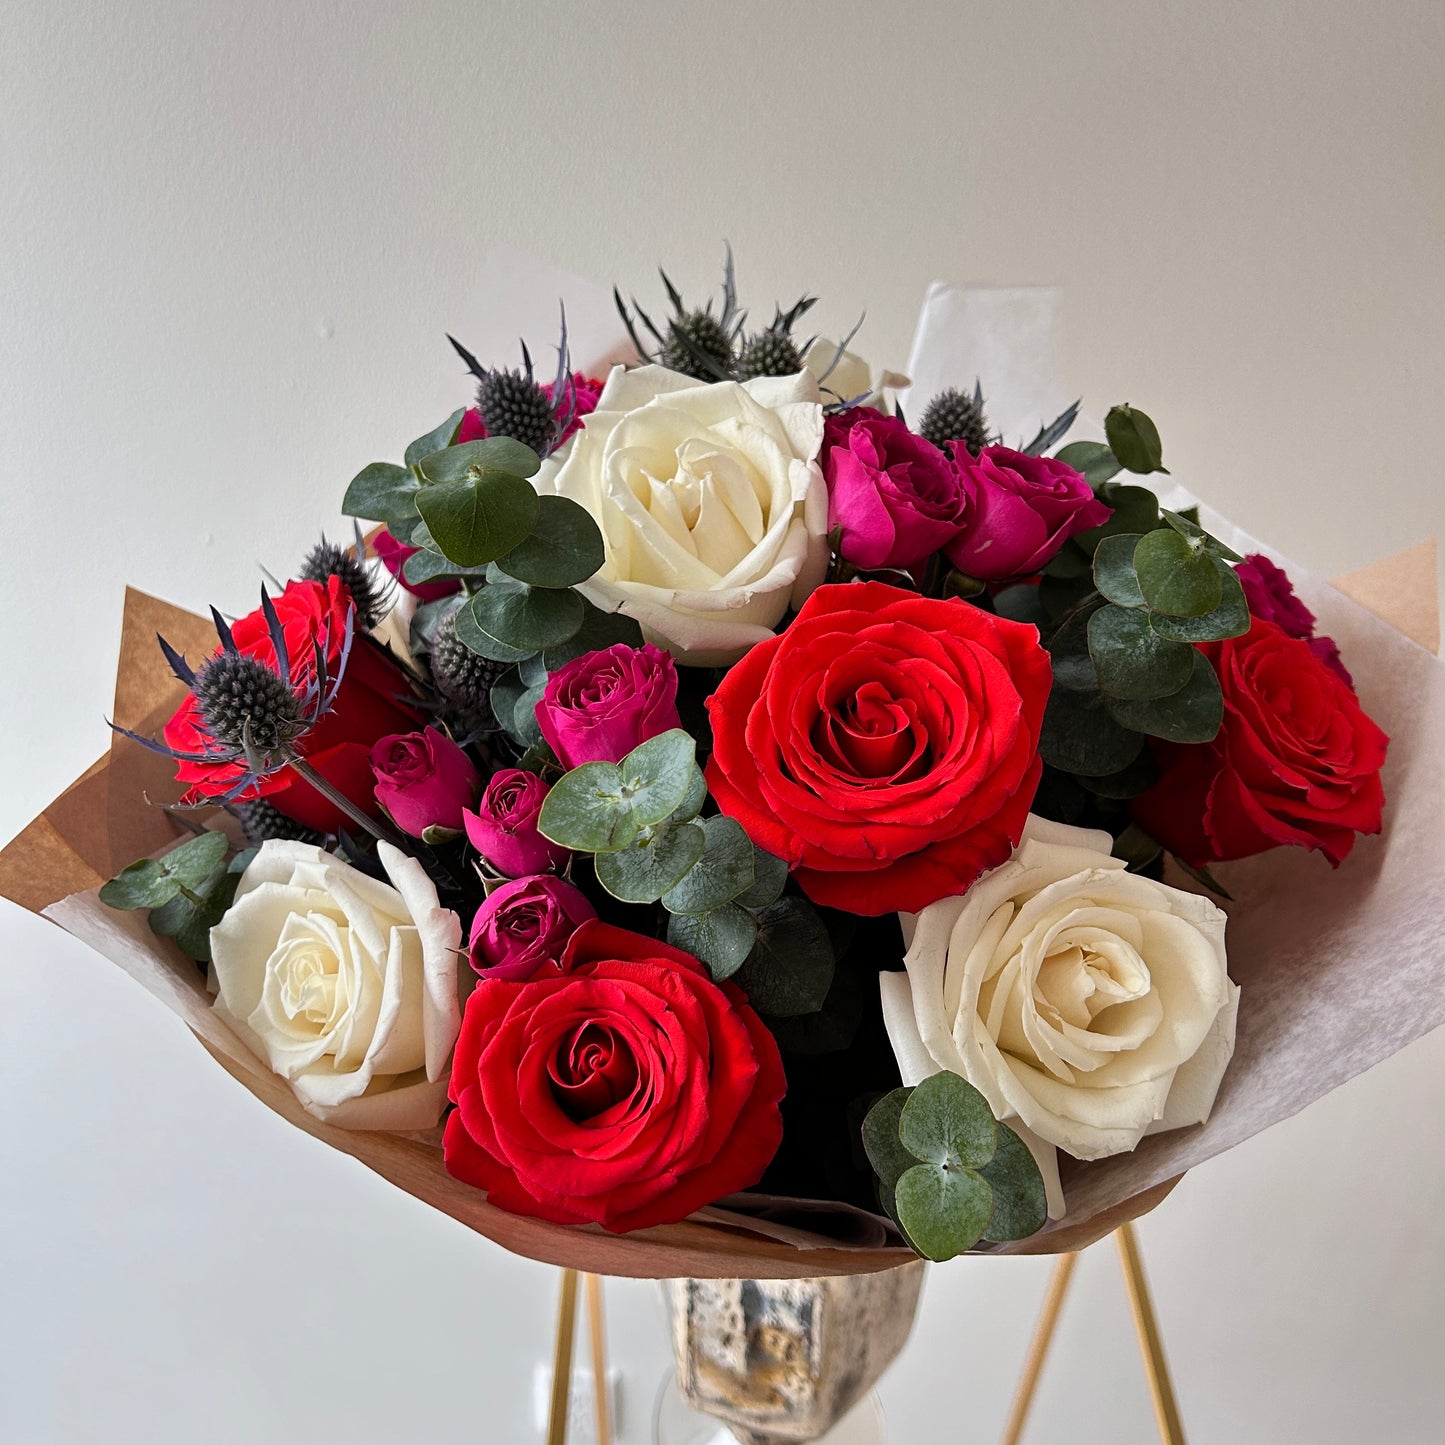 Berry Cherry - Red and White Rose Bouquet